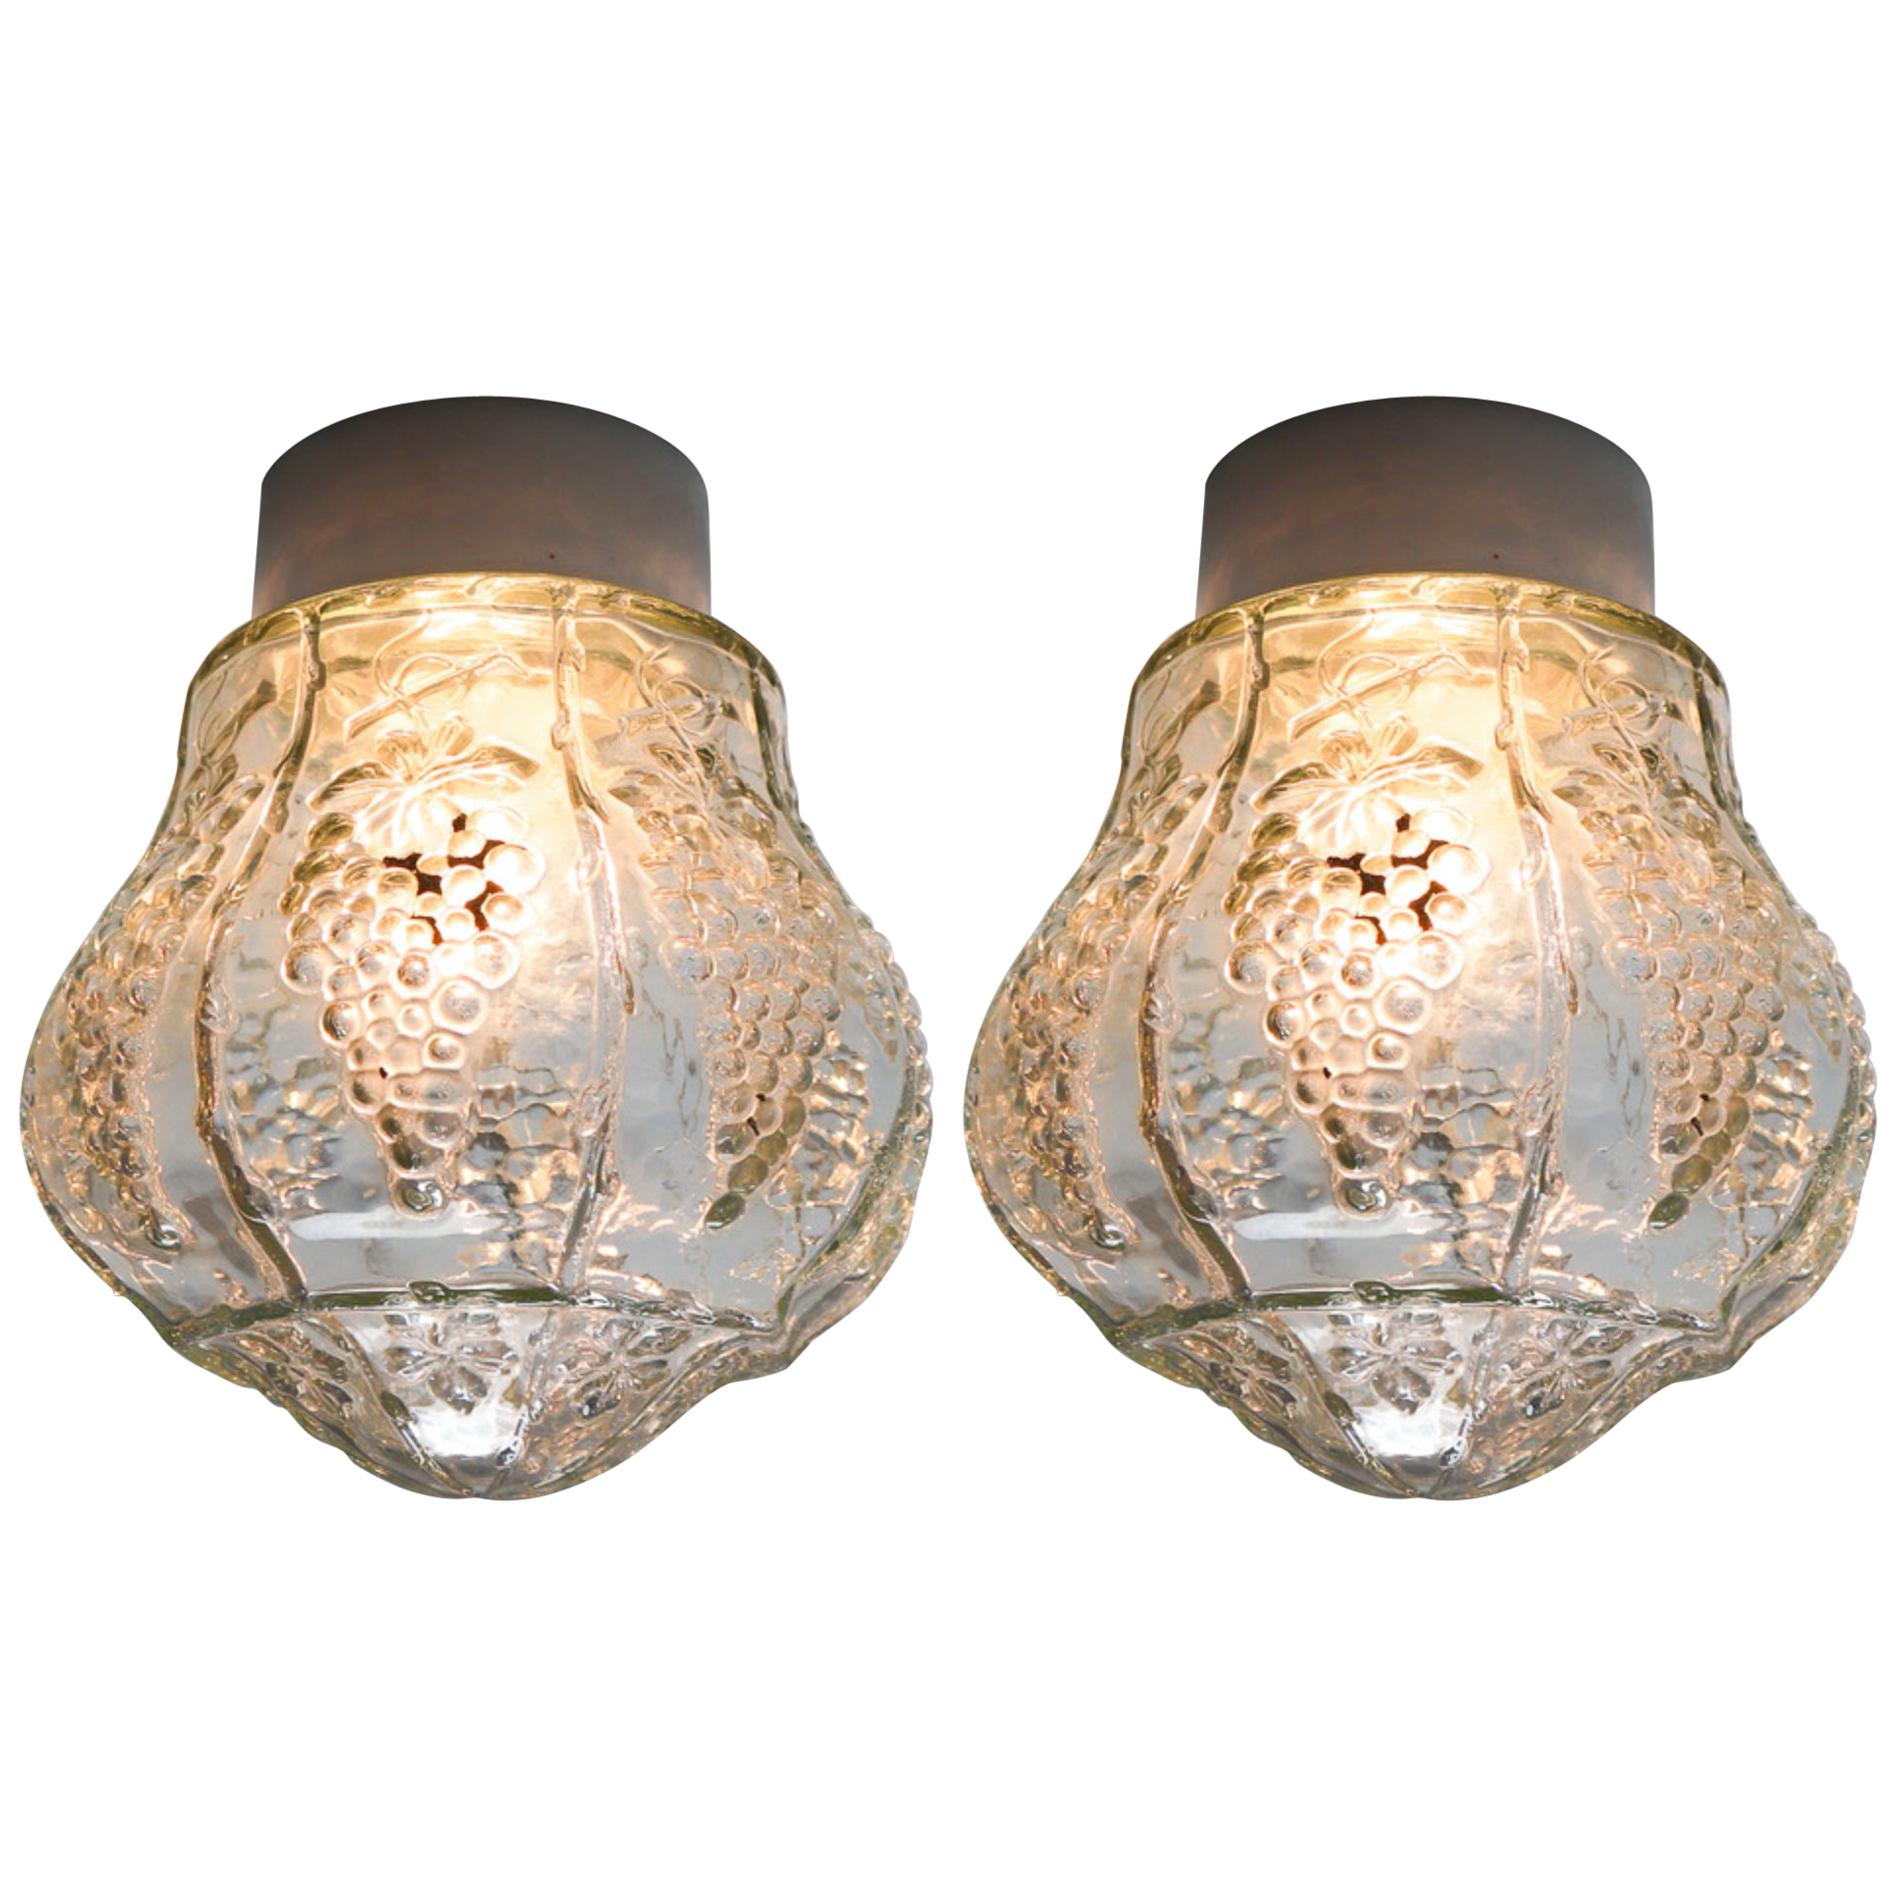 Set French Wall/Ceiling Lights with Clear Structured Glass Porcelain Base, 1930s